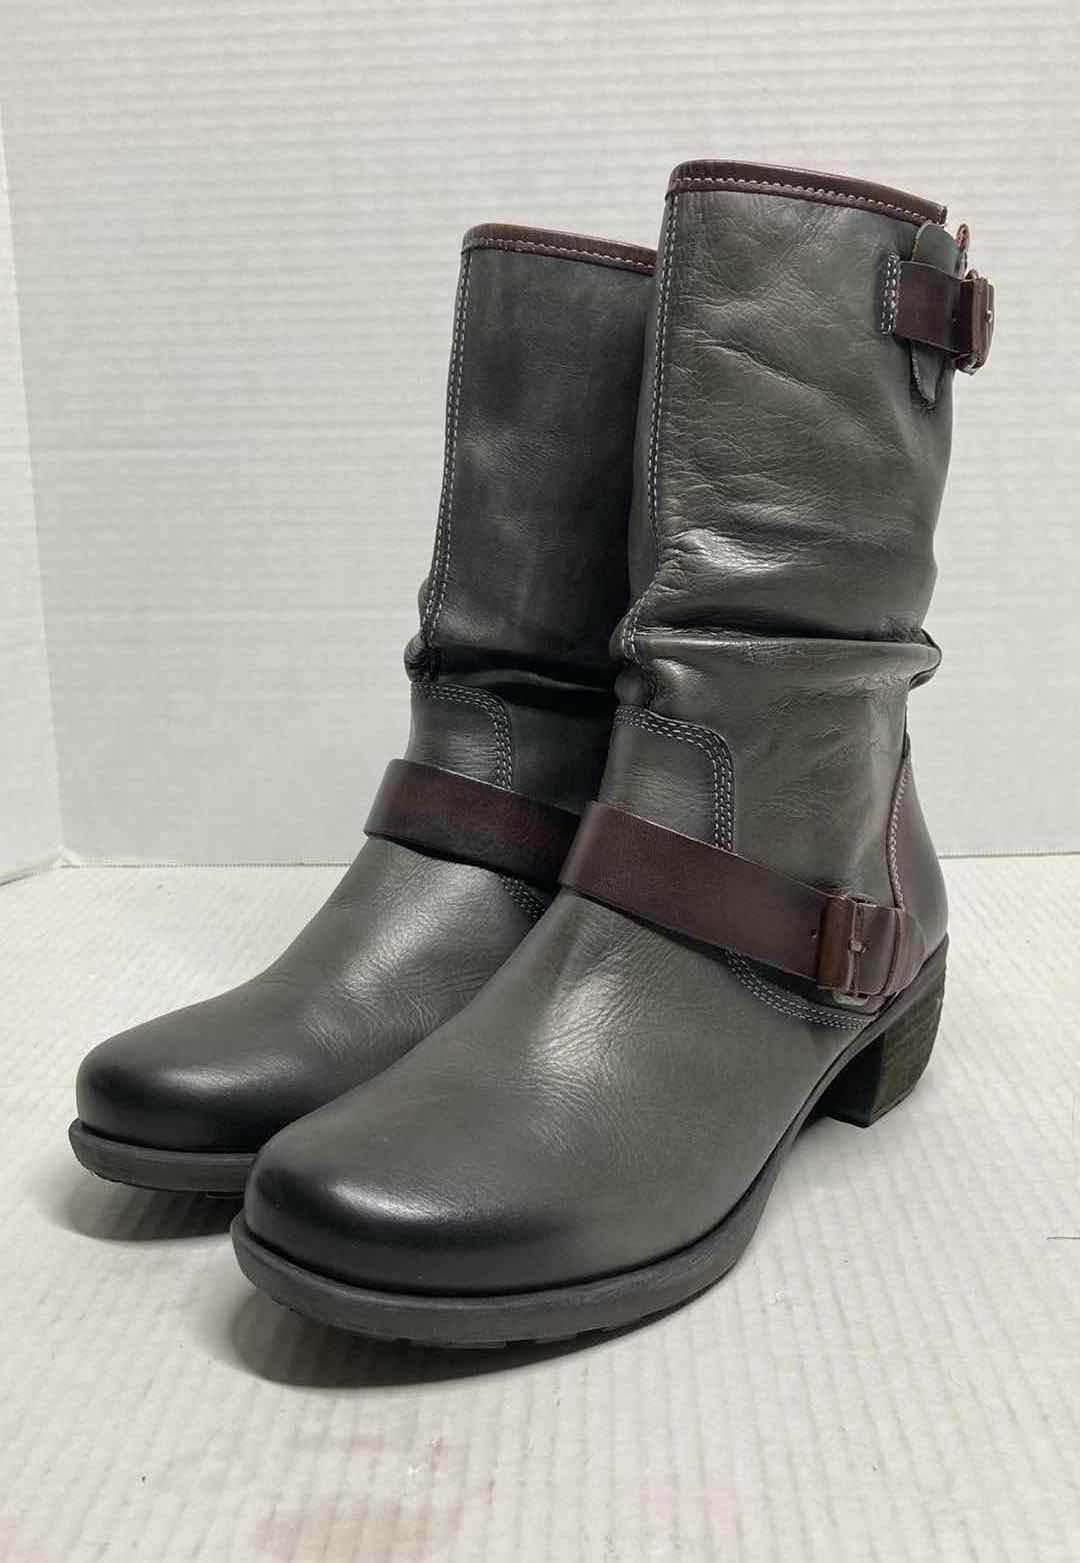 Photo 1 of PIKOLINOS DARK GREY TALL LEATHER COMBAT BOOTS W BROWN BUCKLE WOMAN’S SIZE EU 39